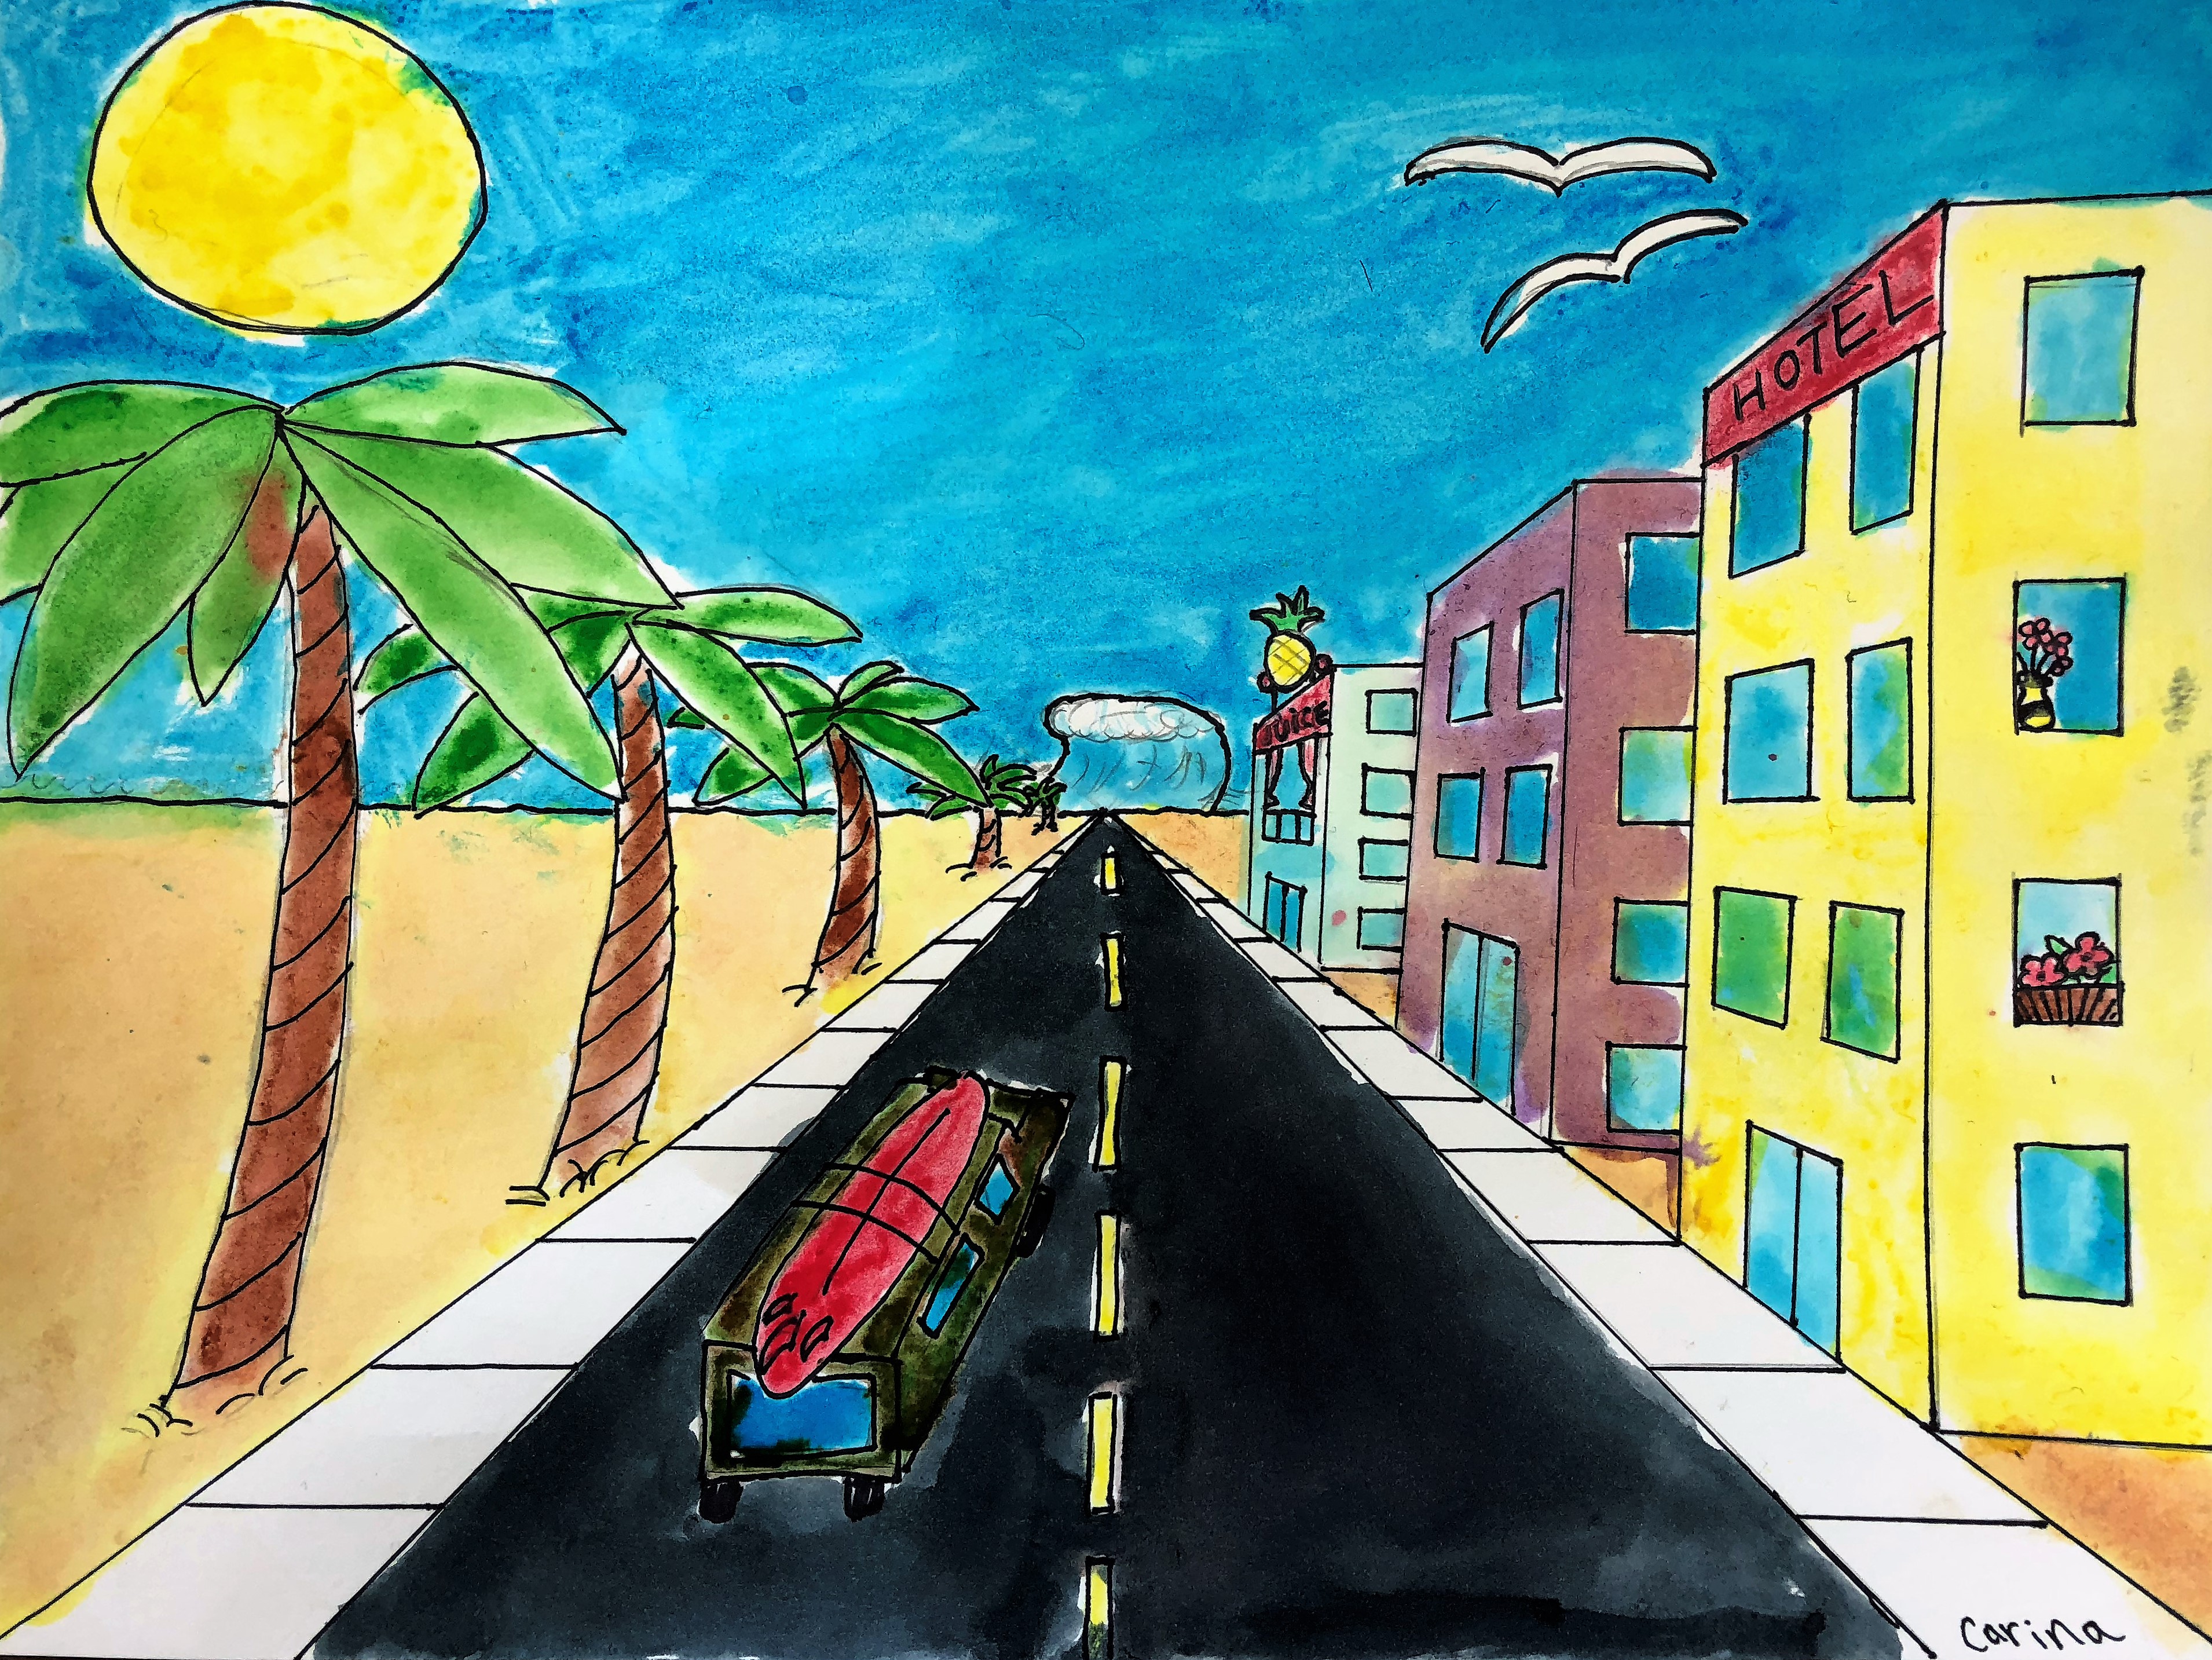 ArtStation - One Point Perspective Drawing! #foryou #canadianartist  #edmontonalberta #onepointperspective #drawing  #castleartsuppliescoloredpencil